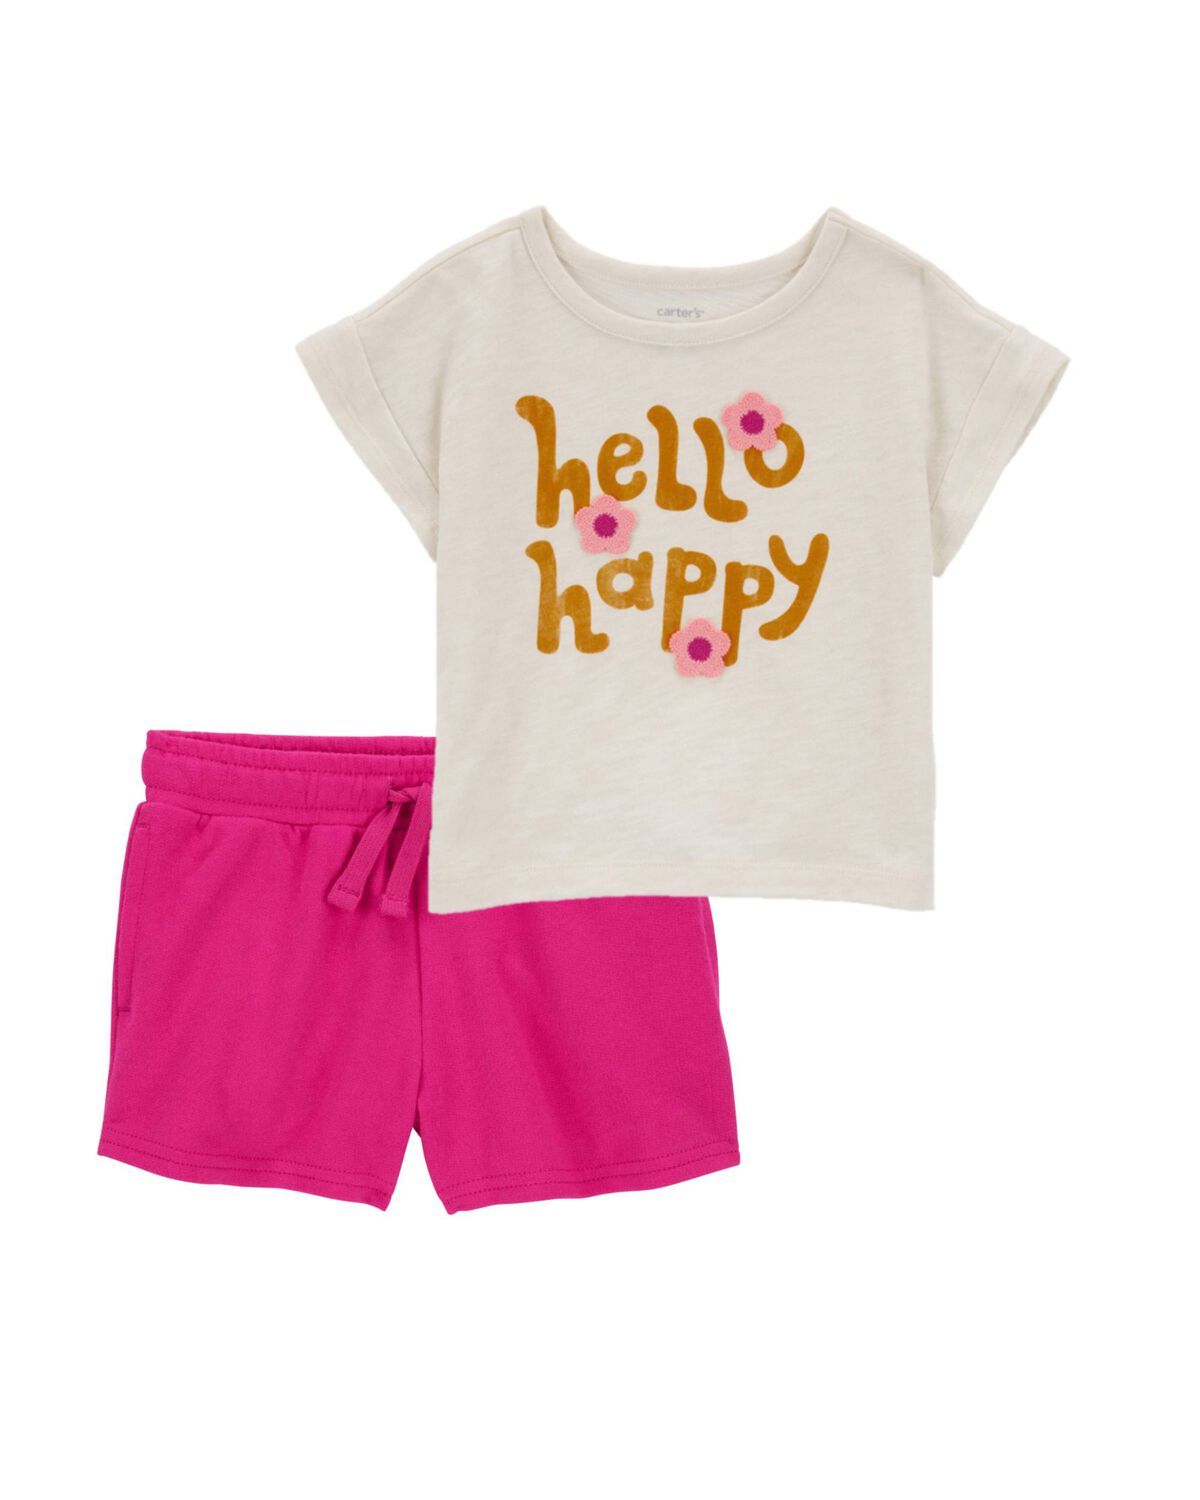 Toddler 2-Piece Hello Happy Tee & Pull-On Shorts Set | Carter's